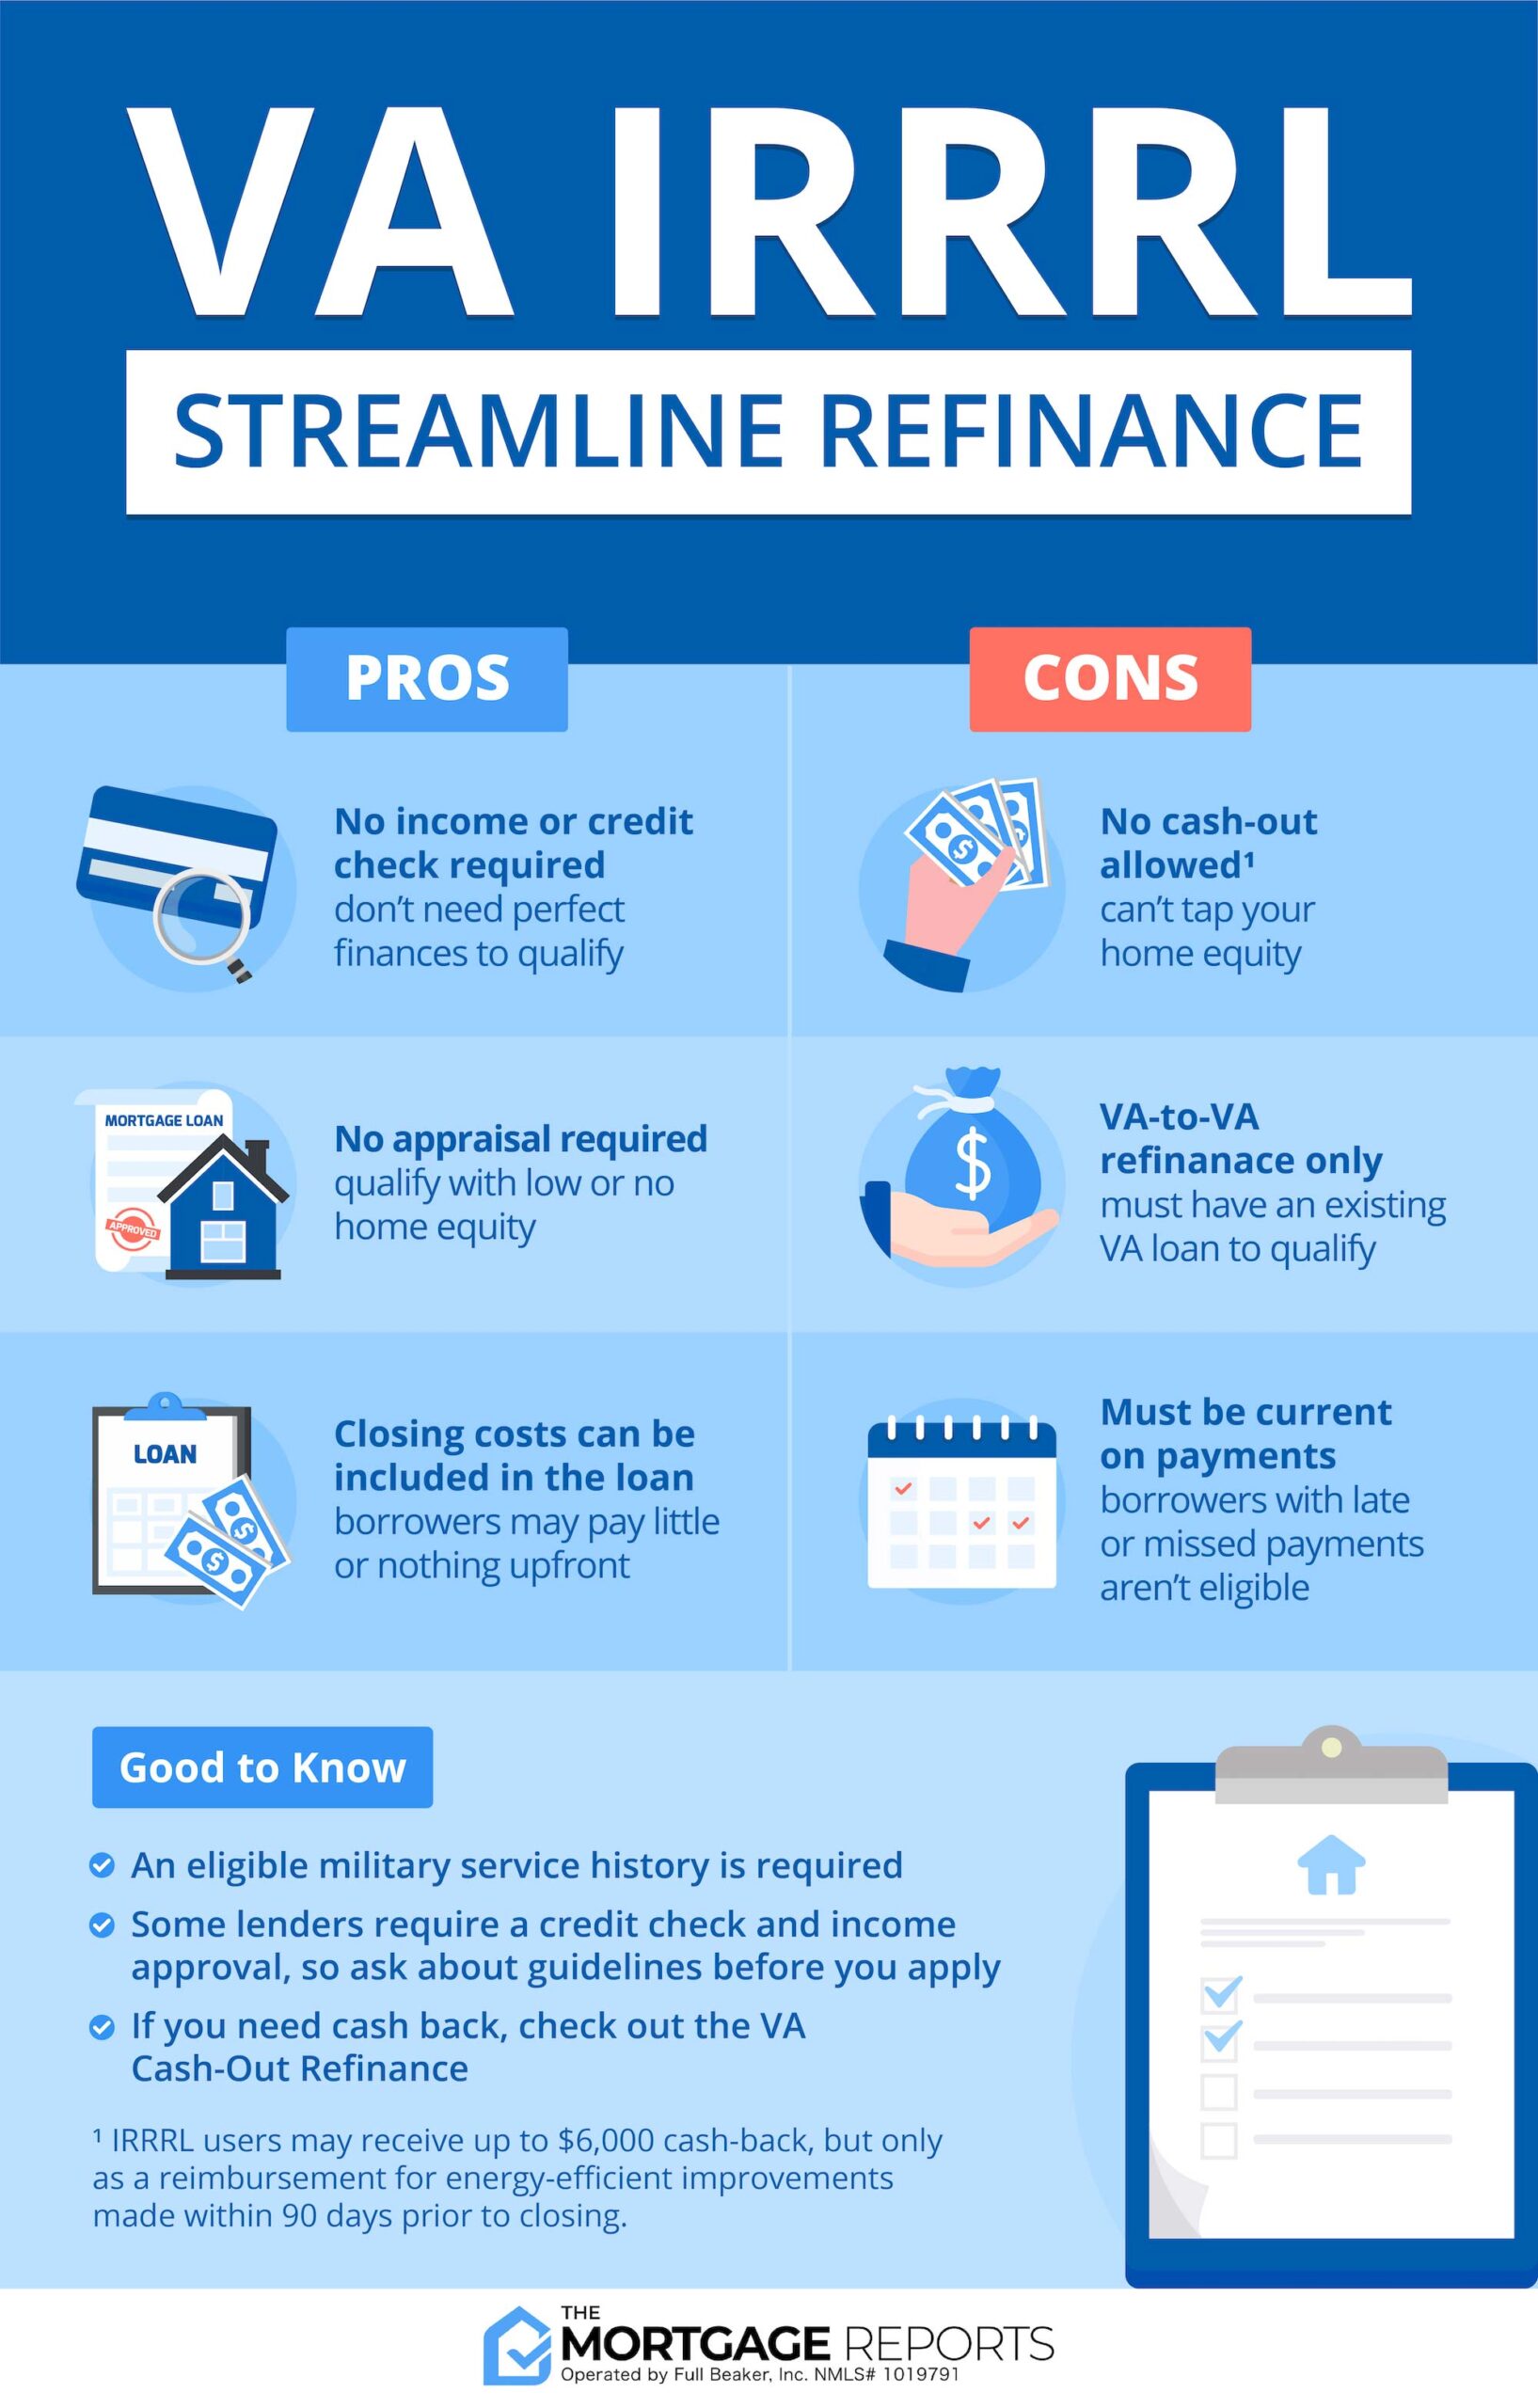 Infographic showing pros and cons of the VA IRRRL (Streamline Refinance). Pros include no income or credit verification; No appraisal; and Closing costs can be rolled into the loan. Cons include no cash out allowed; Must be a VA-to-VA refinance; and Borrower must be current on payments.